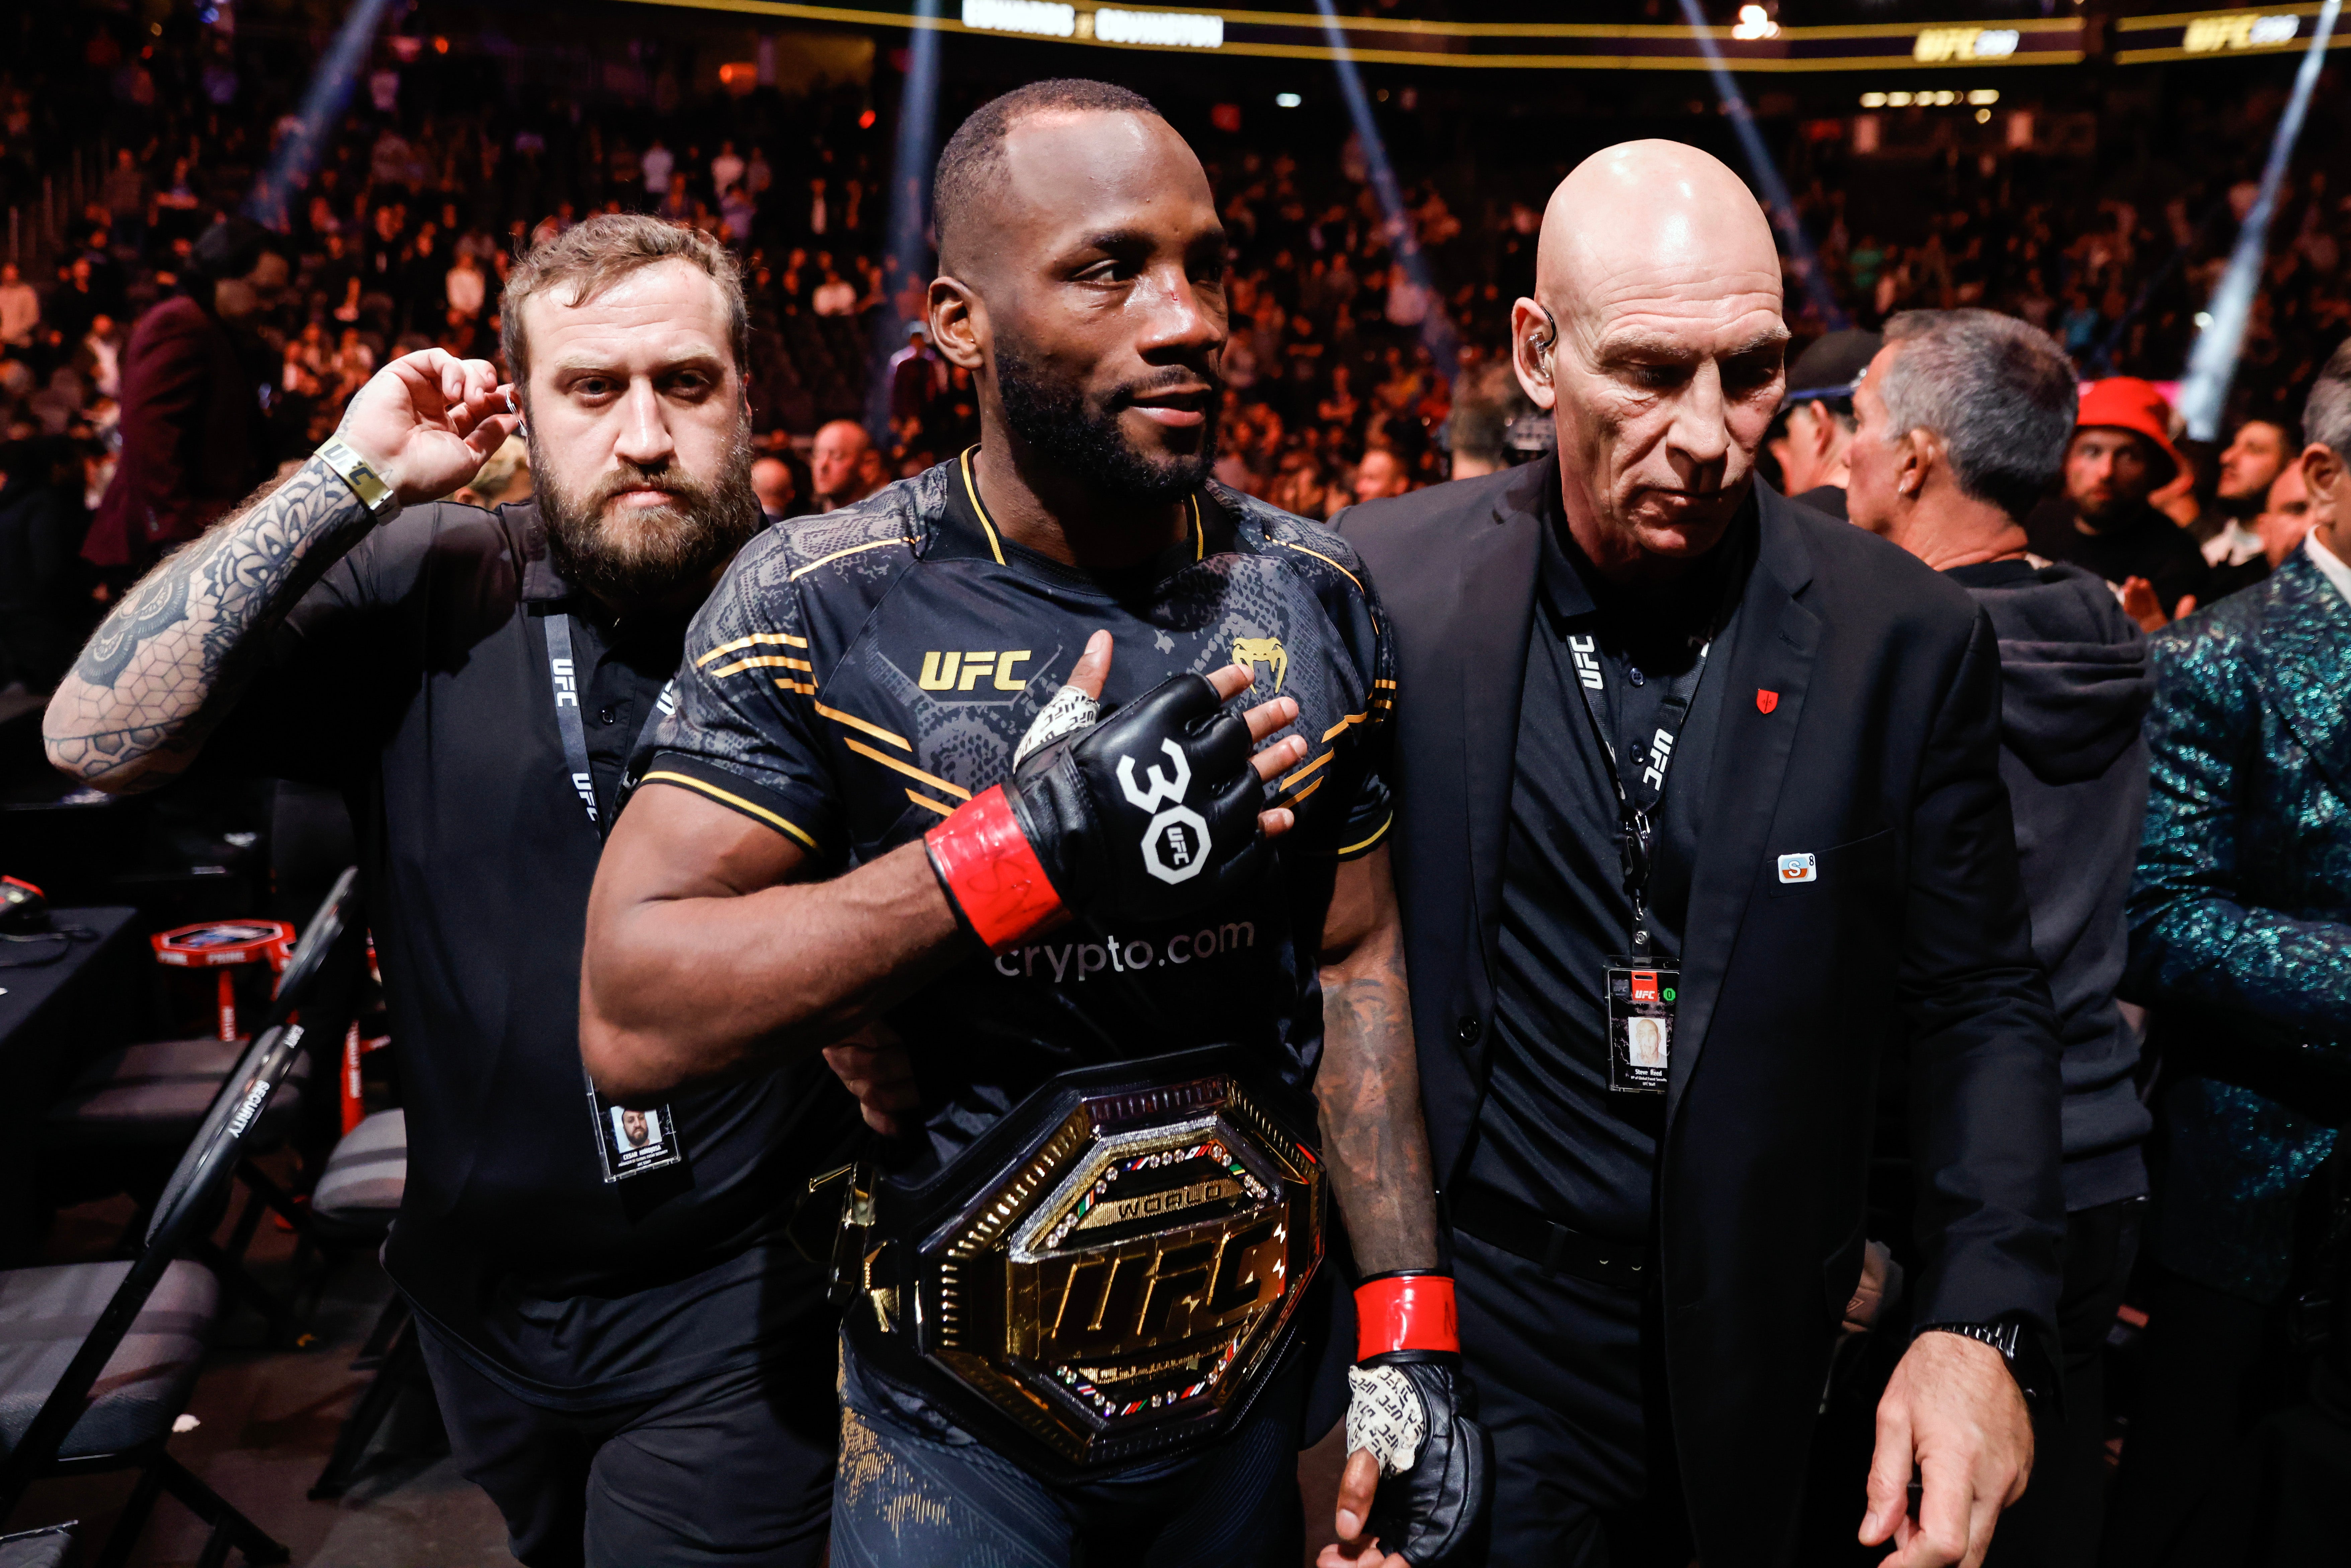 Leon Edwards has retained the UFC welterweight belt twice since winning it